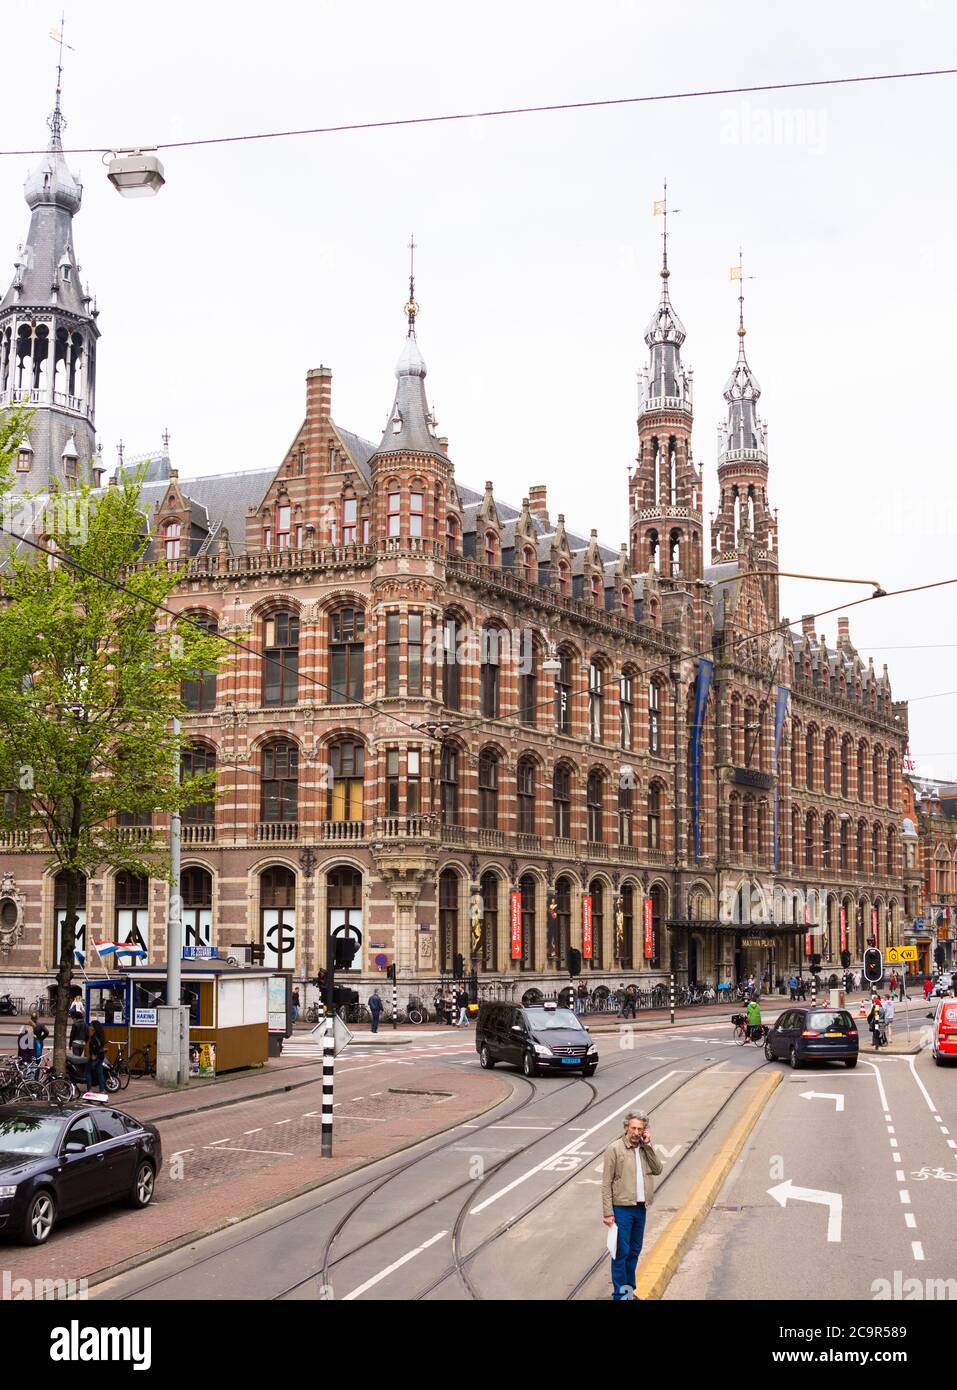 Magna Plaza or Maxima Plaza, Amsterdam, The Netherlands with many tourists, shoppers and busy traffic Stock Photo